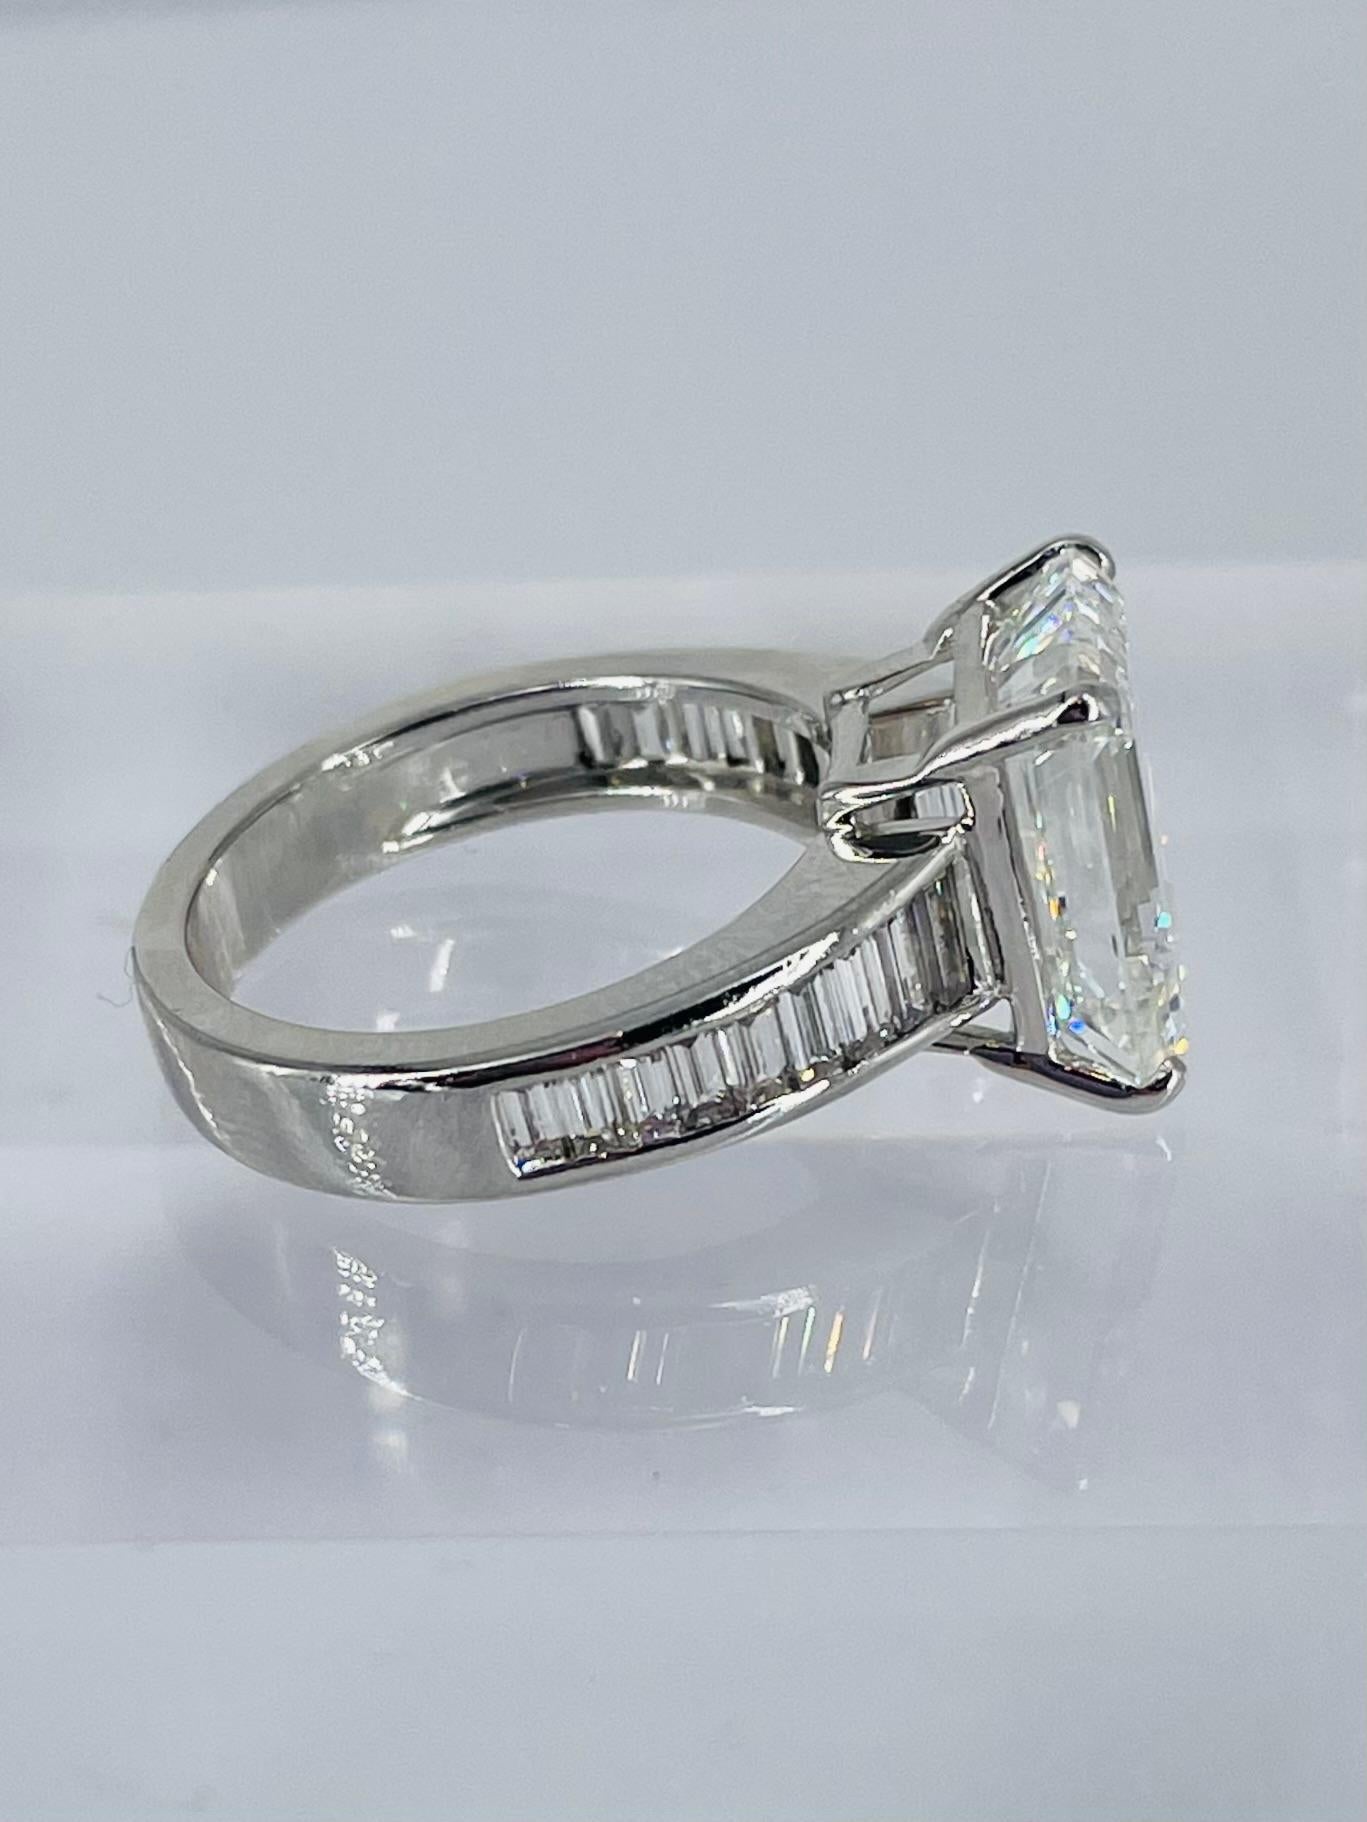 J. Birnbach 6.35 carat GIA Emerald Cut Diamond Ring with Graduated Baguette Band For Sale 1